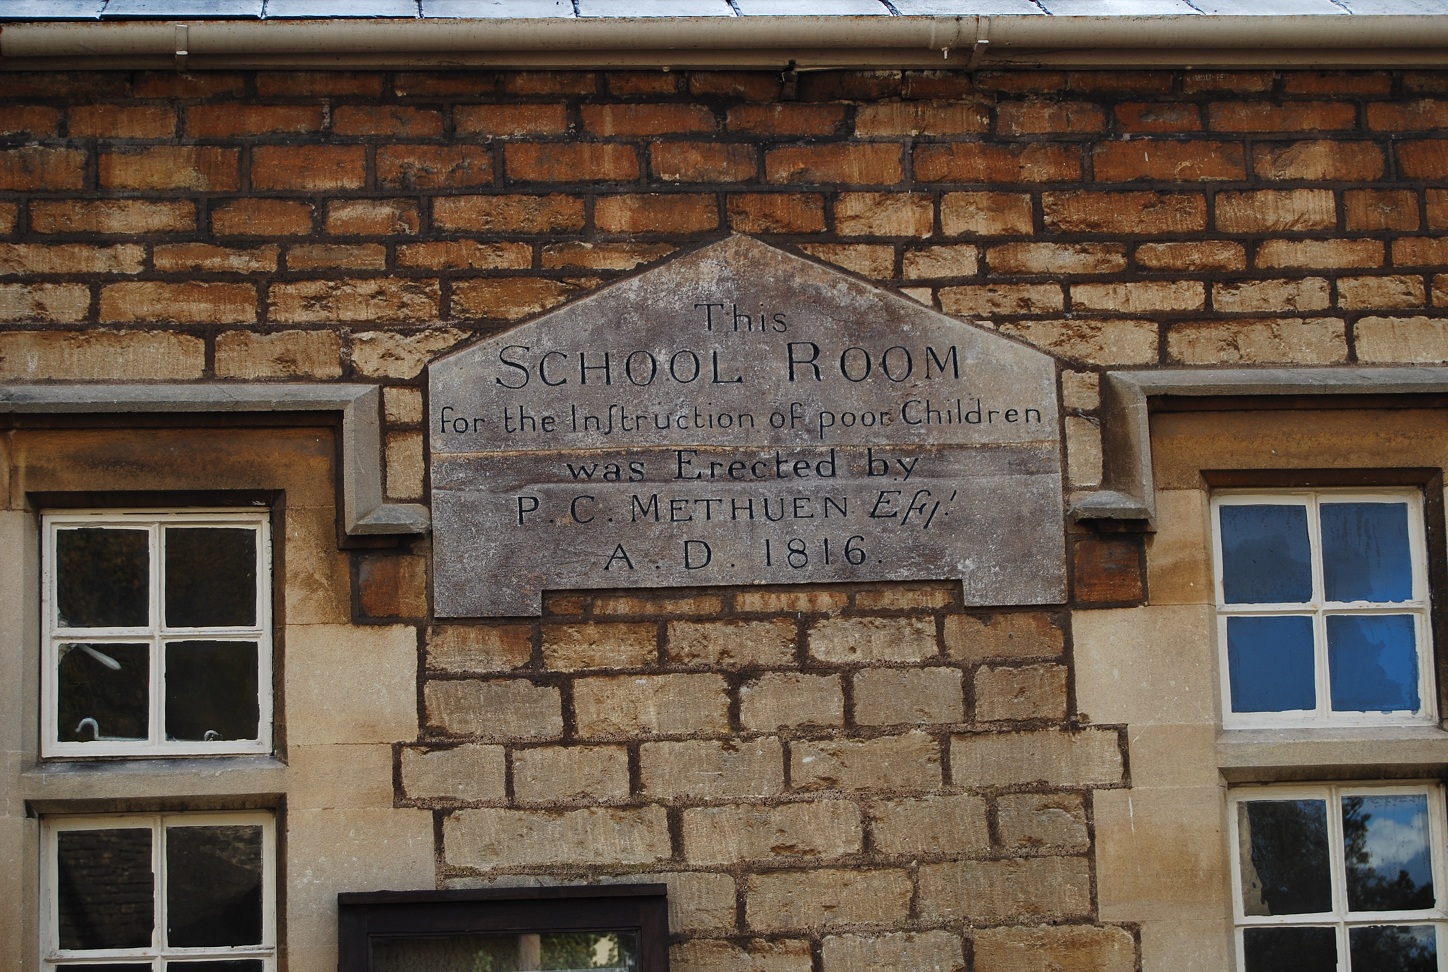 The school room for the instruction of poor children was erected by P.C. Methuen, A.D. 1816